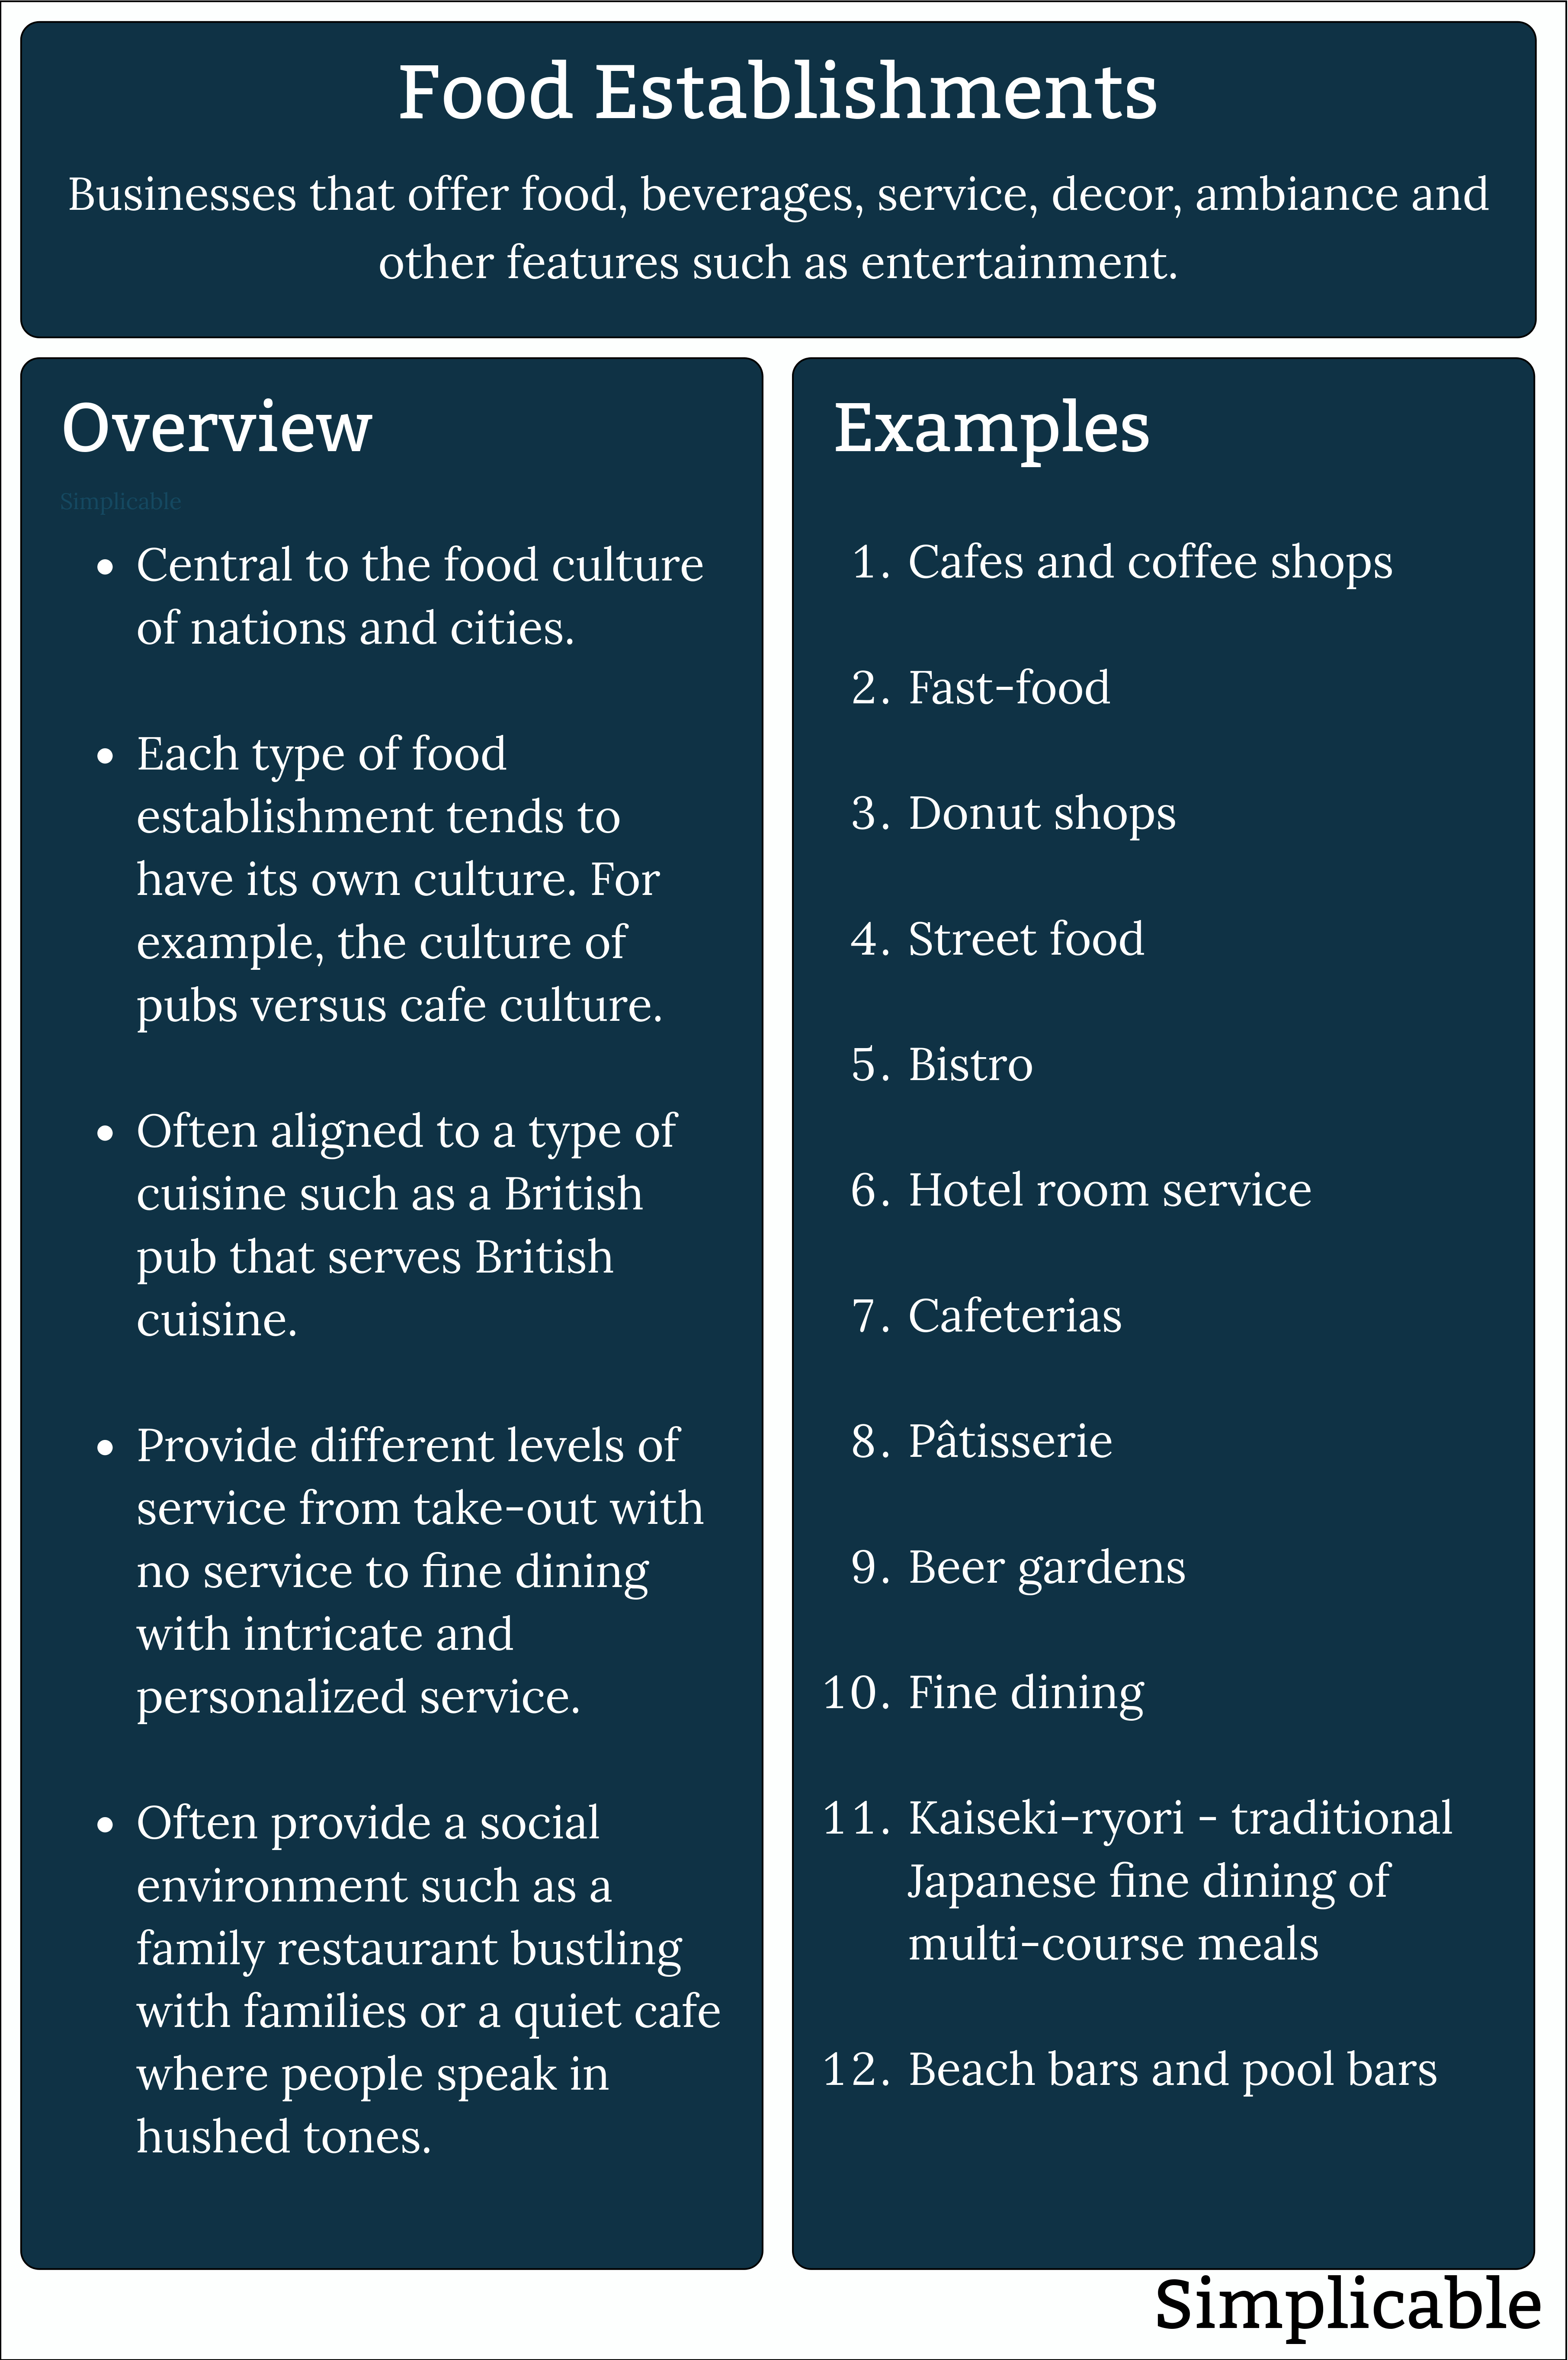 food establishments overview and examples